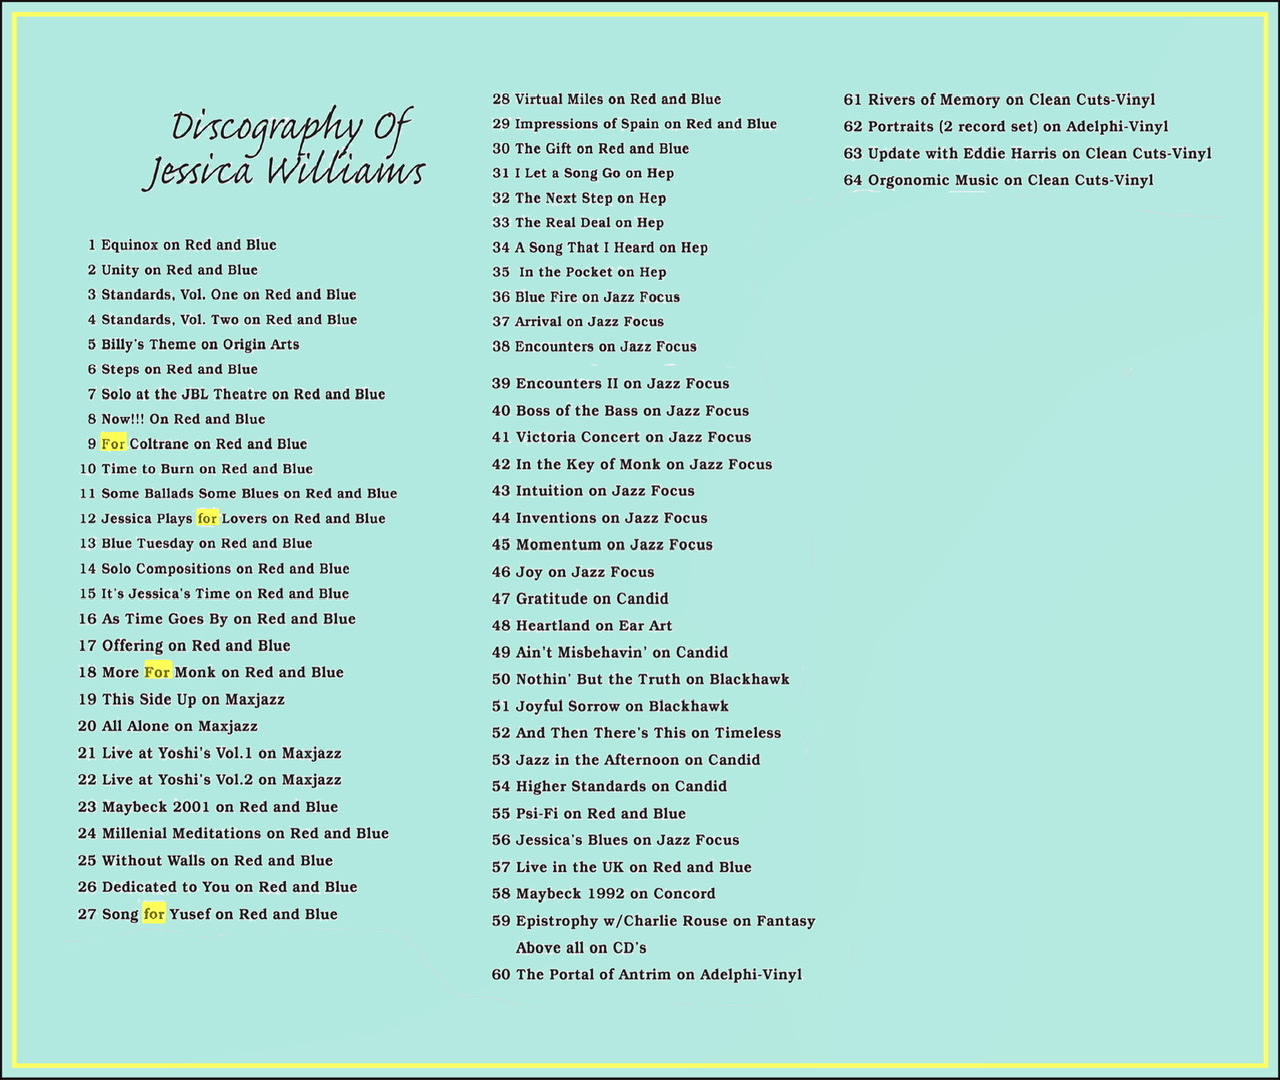 A framed list of Jessica Williams's discography.